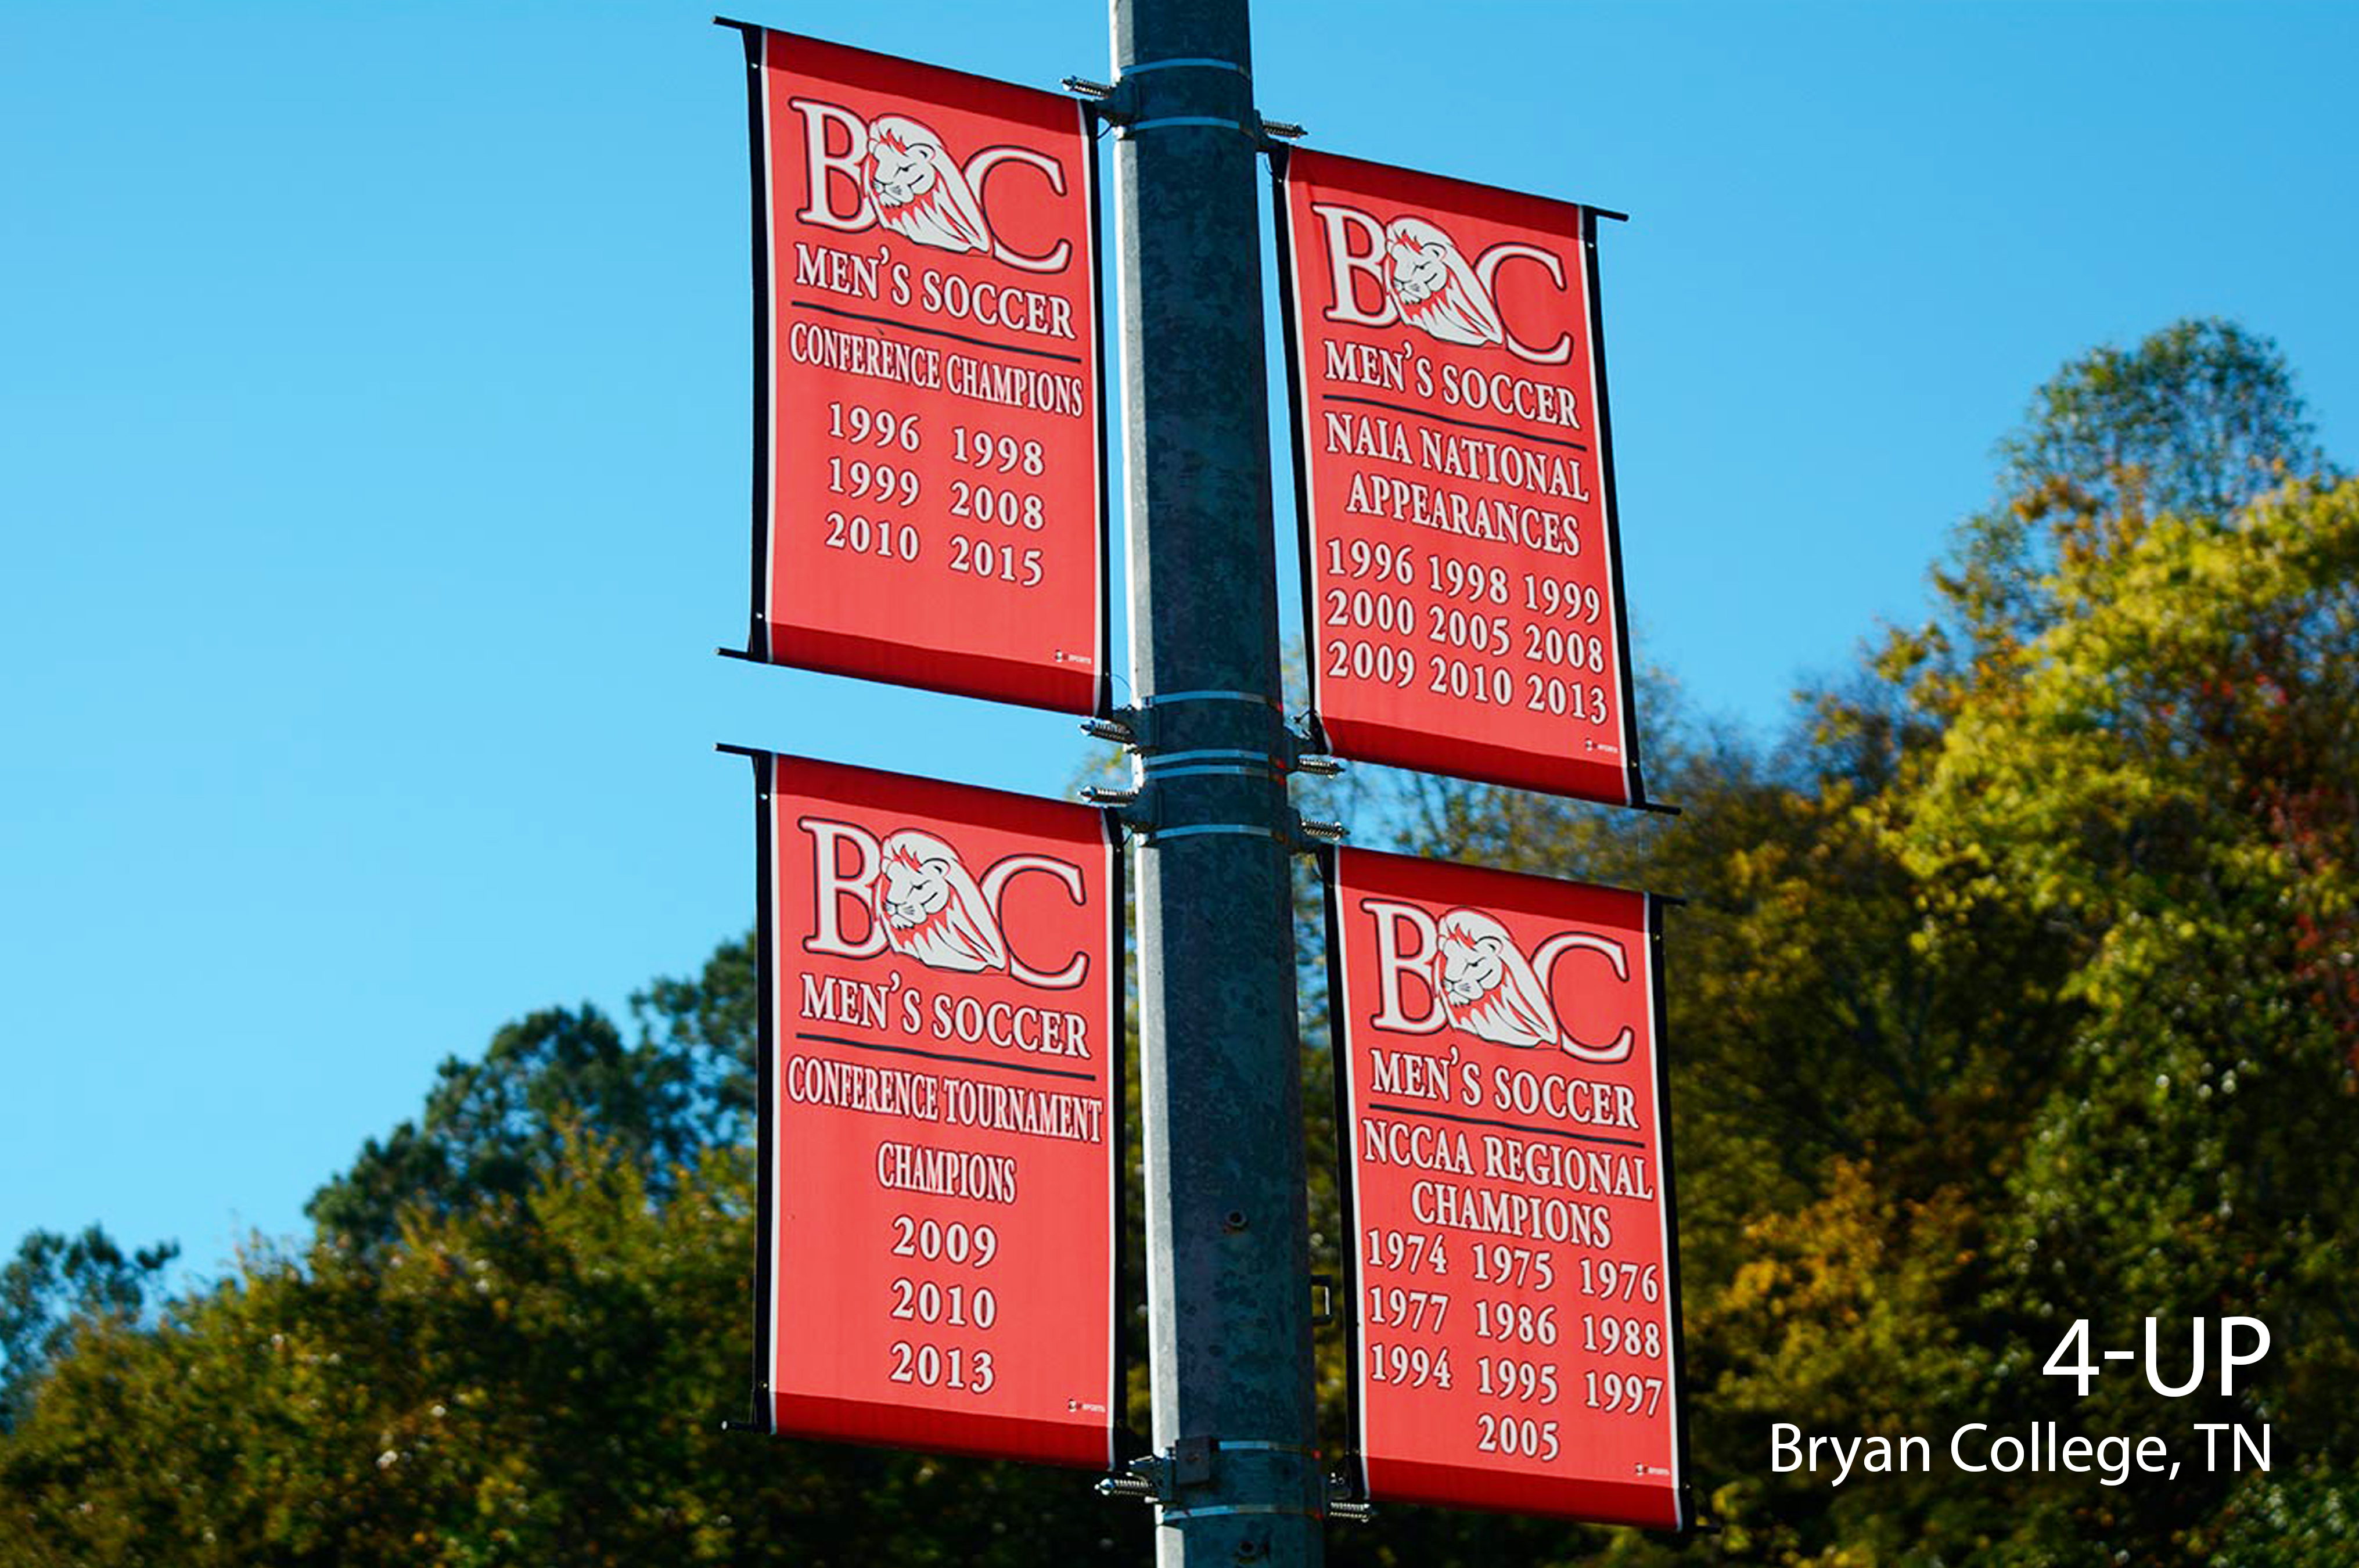 Multiple banner saver brackets on a street light pole with custom banners.